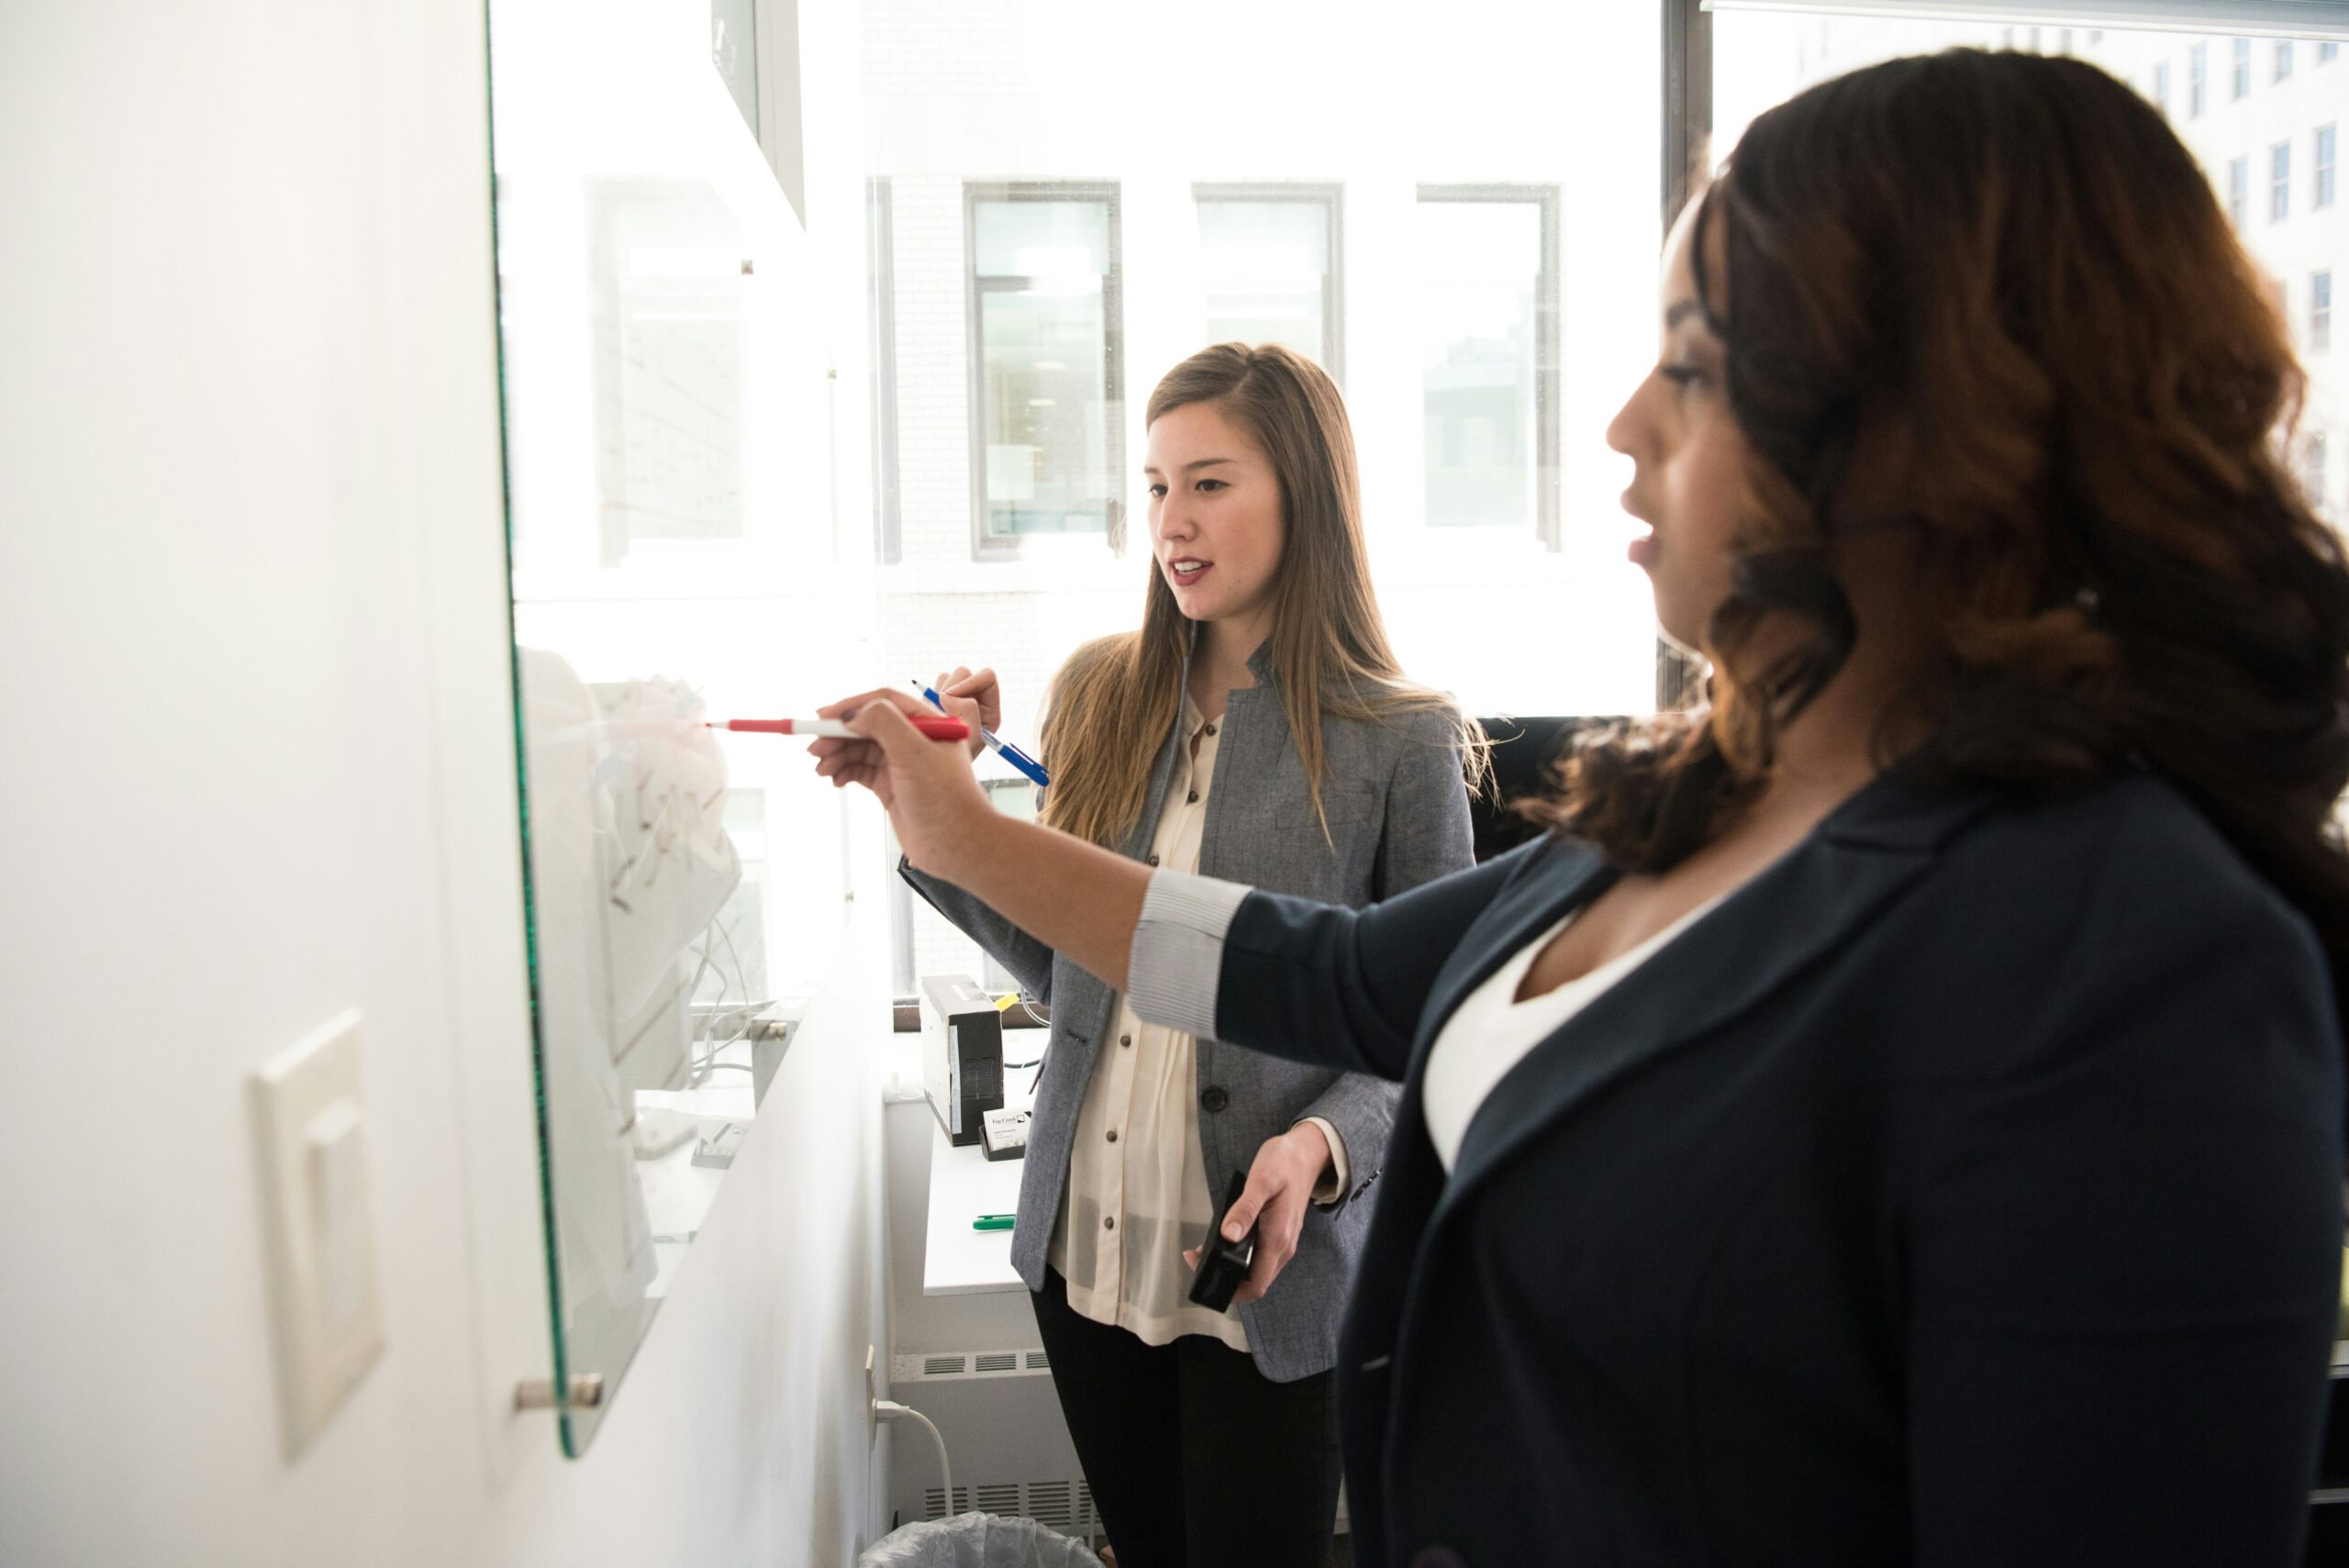 Two professional women collaborate at a whiteboard in a tech consulting office, with one writing and explaining as the other listens attentively.